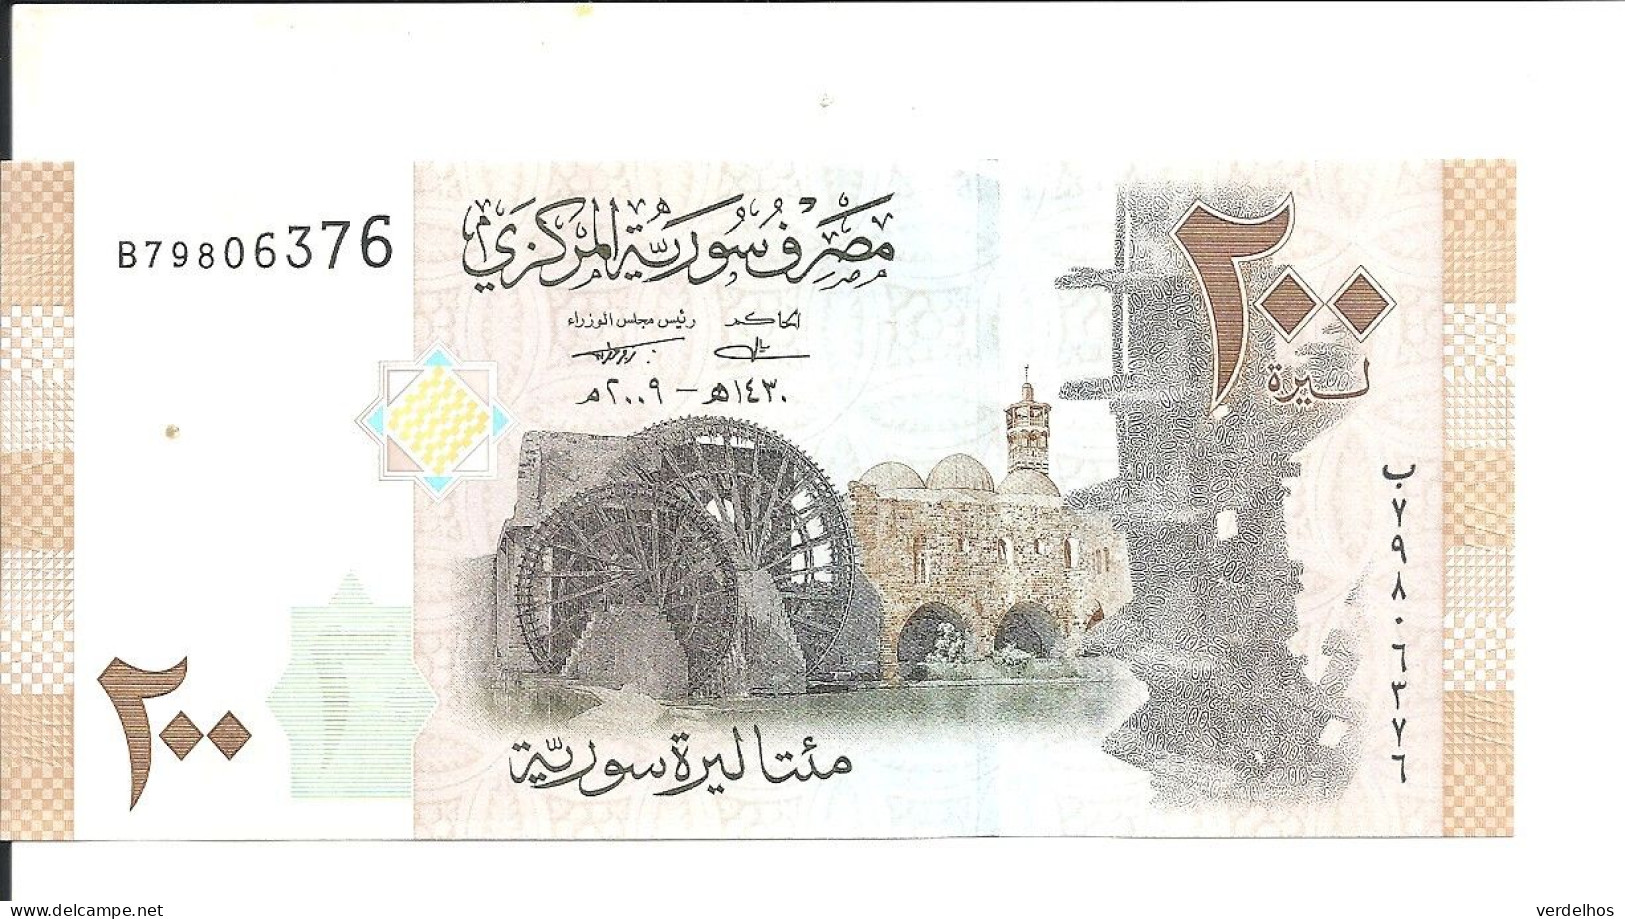 SYRIE 200 POUNDS 2009 UNC P 114 - Syria